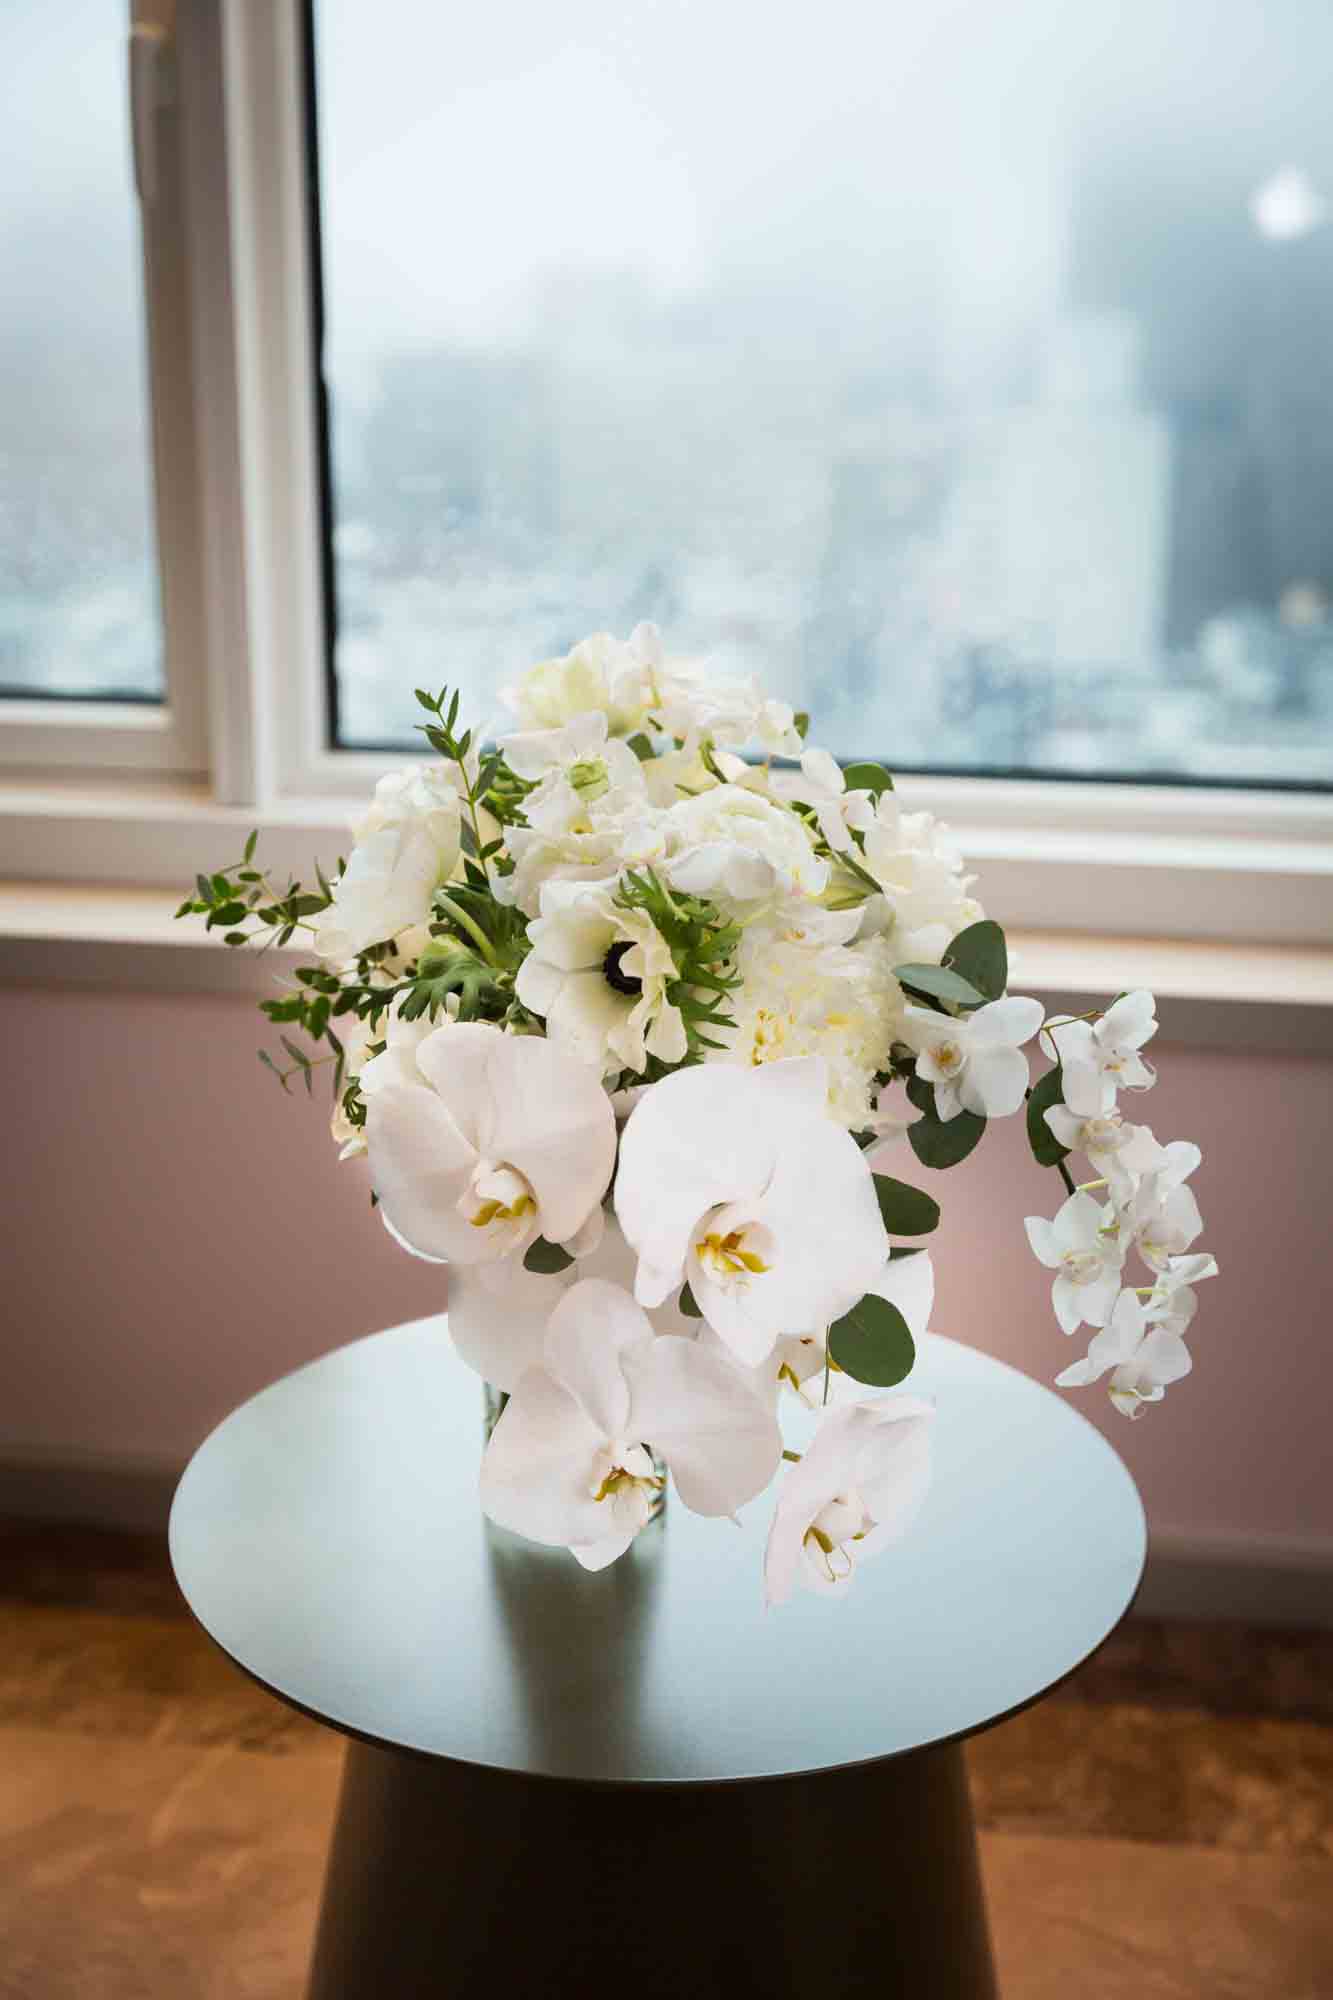 Bouquet of white flowers sitting on table in front of hotel window